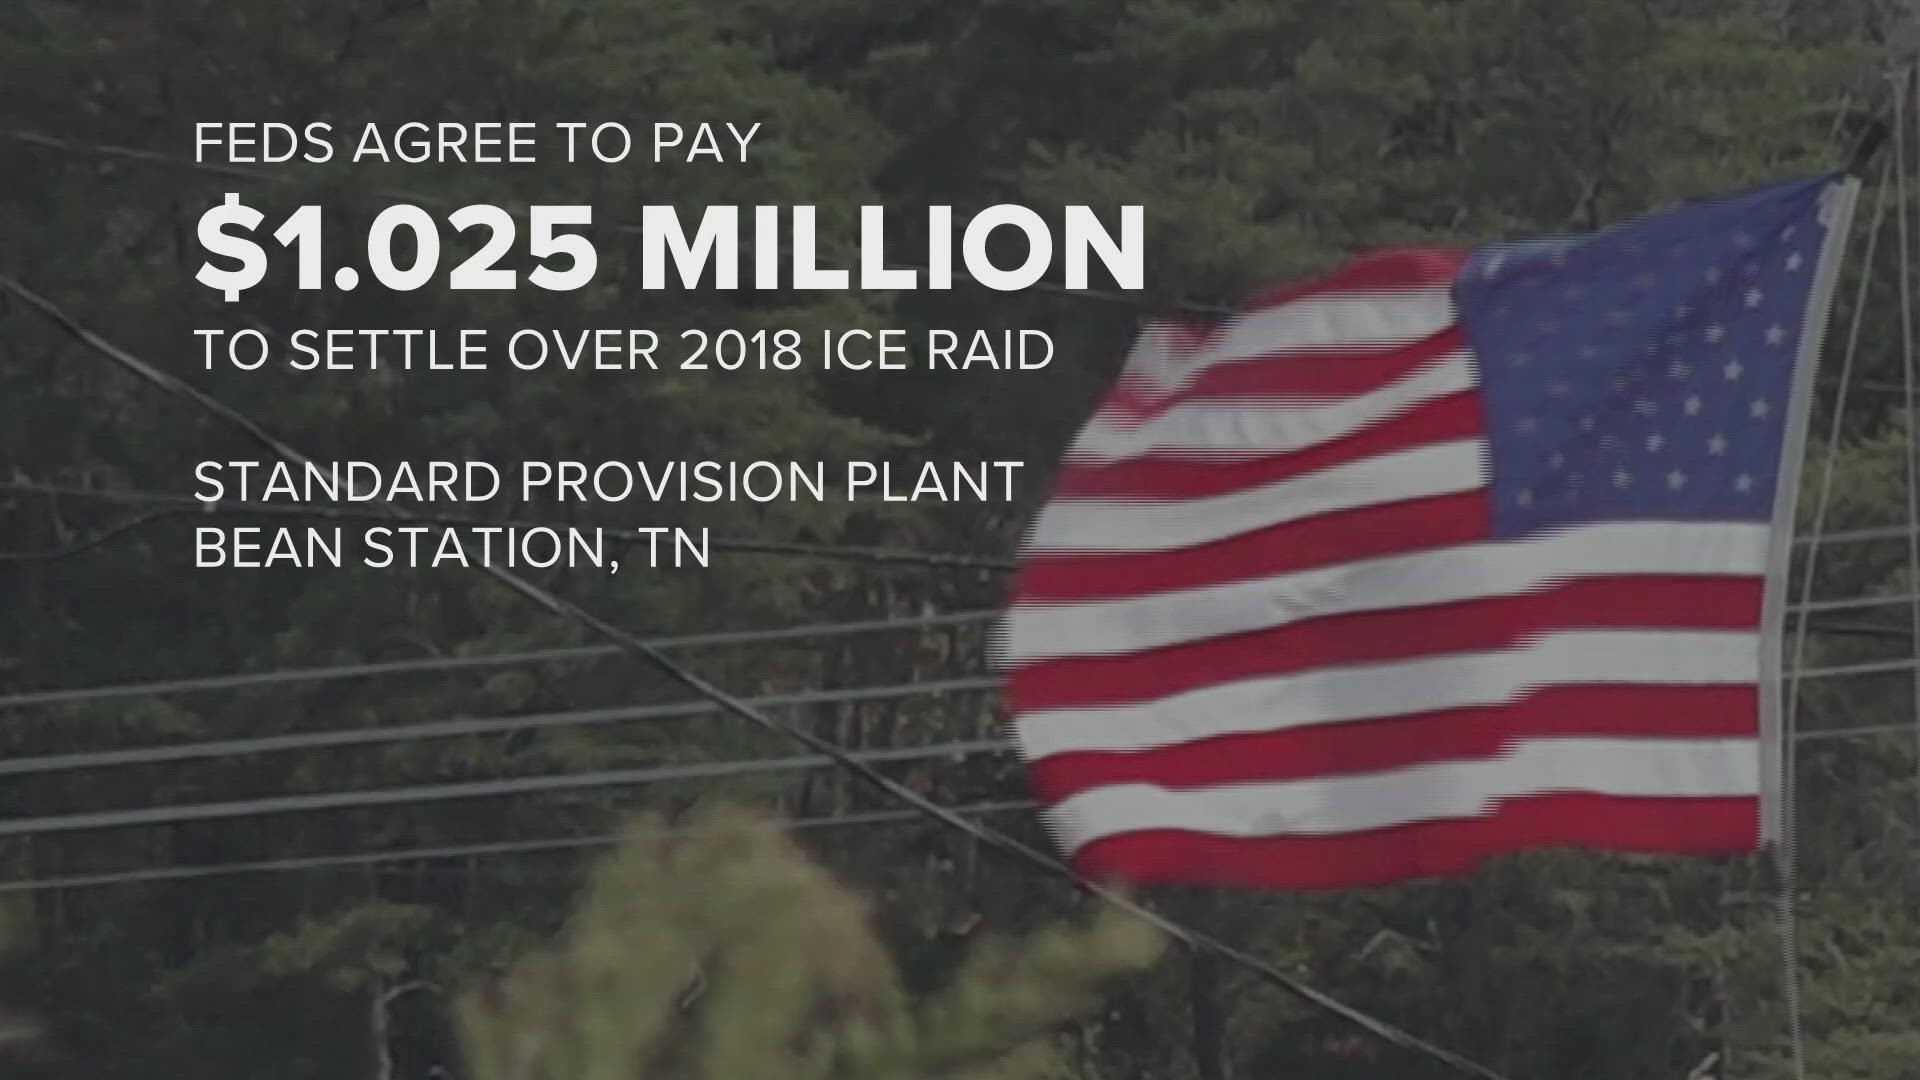 U.S. District Court Judge Travis McDonough approved a settlement to settle claims regarding the 2018 ICE raid of a plant in Grainger County, Monday.